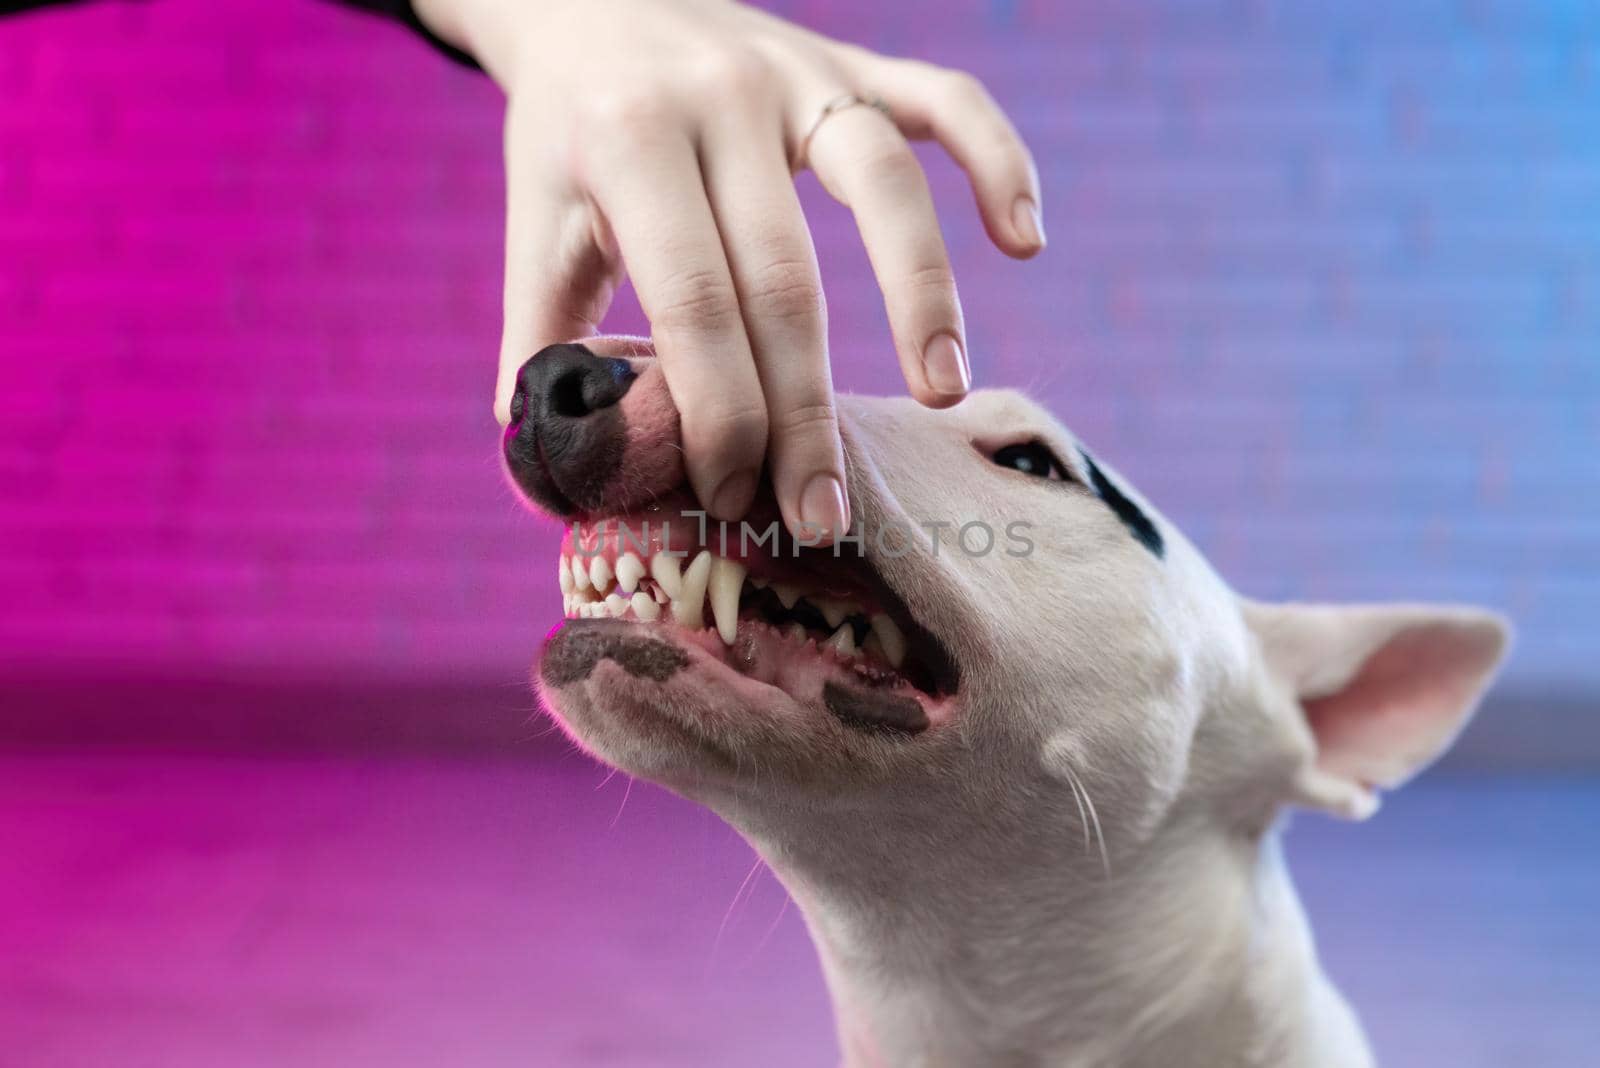 human hand opens the mouth of a dog showing the snarl and teeth of a white bull terrier